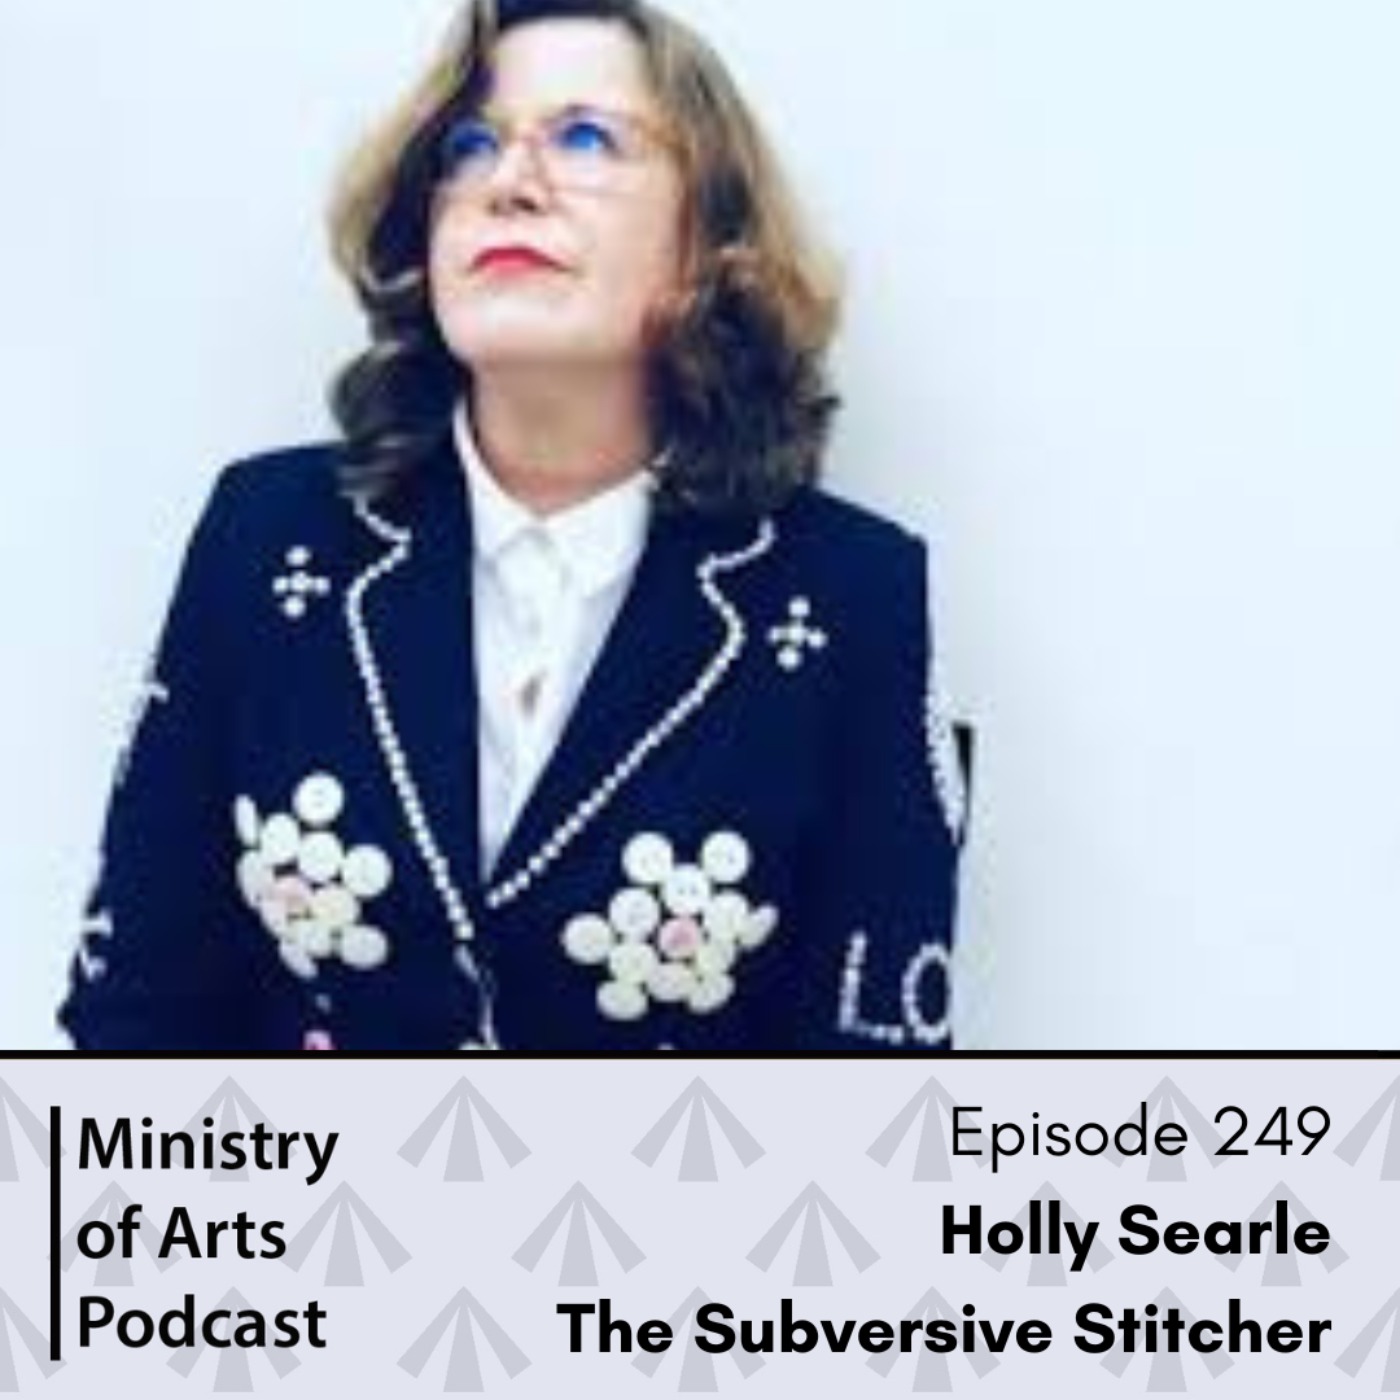 Ep.249 Holly Searle aka The Subversive Stitcher - Ministry of Arts Podcast